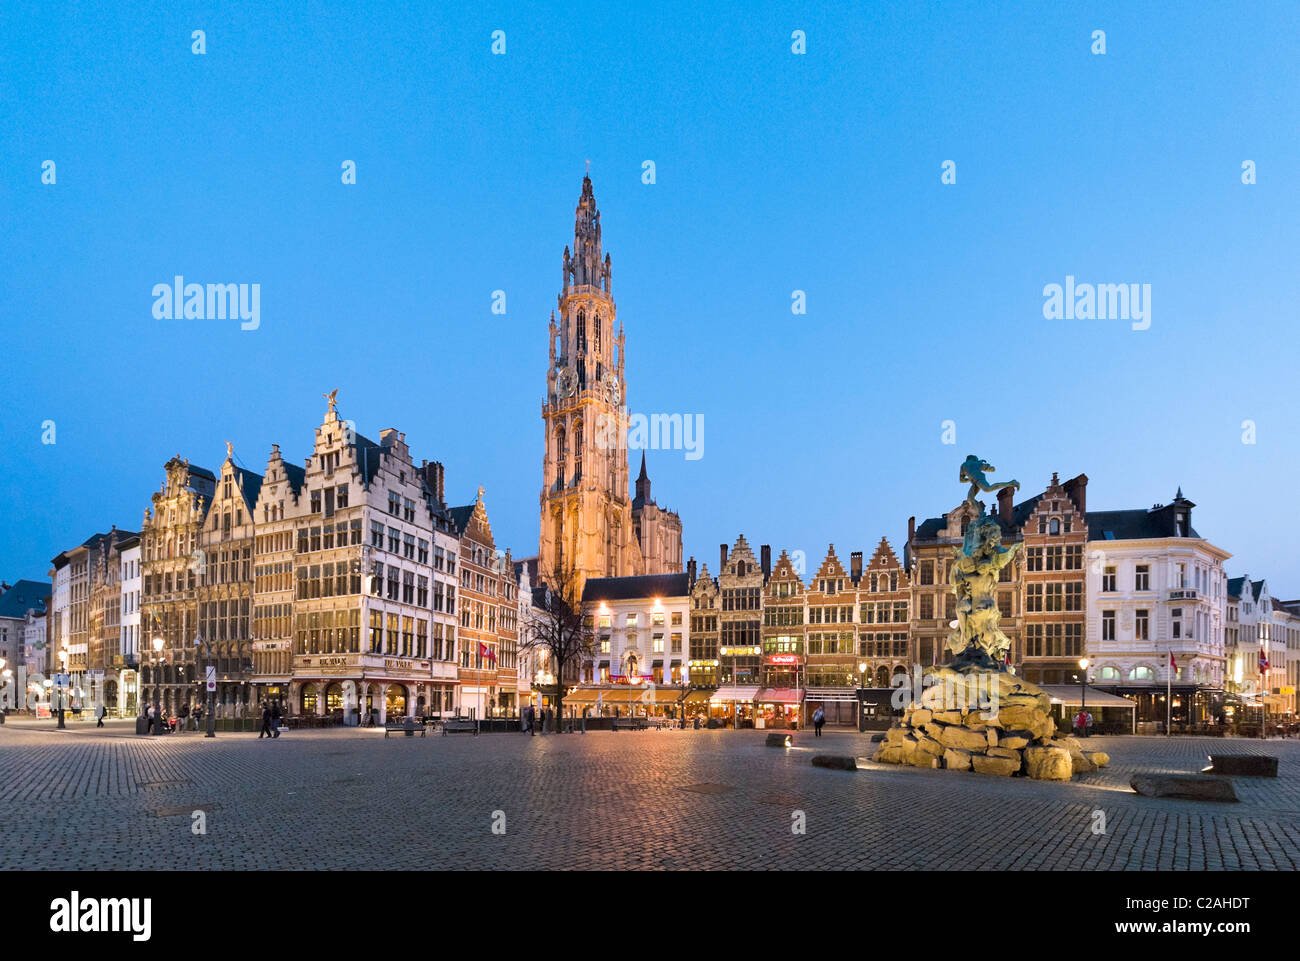 The Grote Mark (Main Square)and Brabo Fountain at night with Onze Lieve Vrouwekathedraal (Cathedral) behind, Antwerp, Belgium Stock Photo